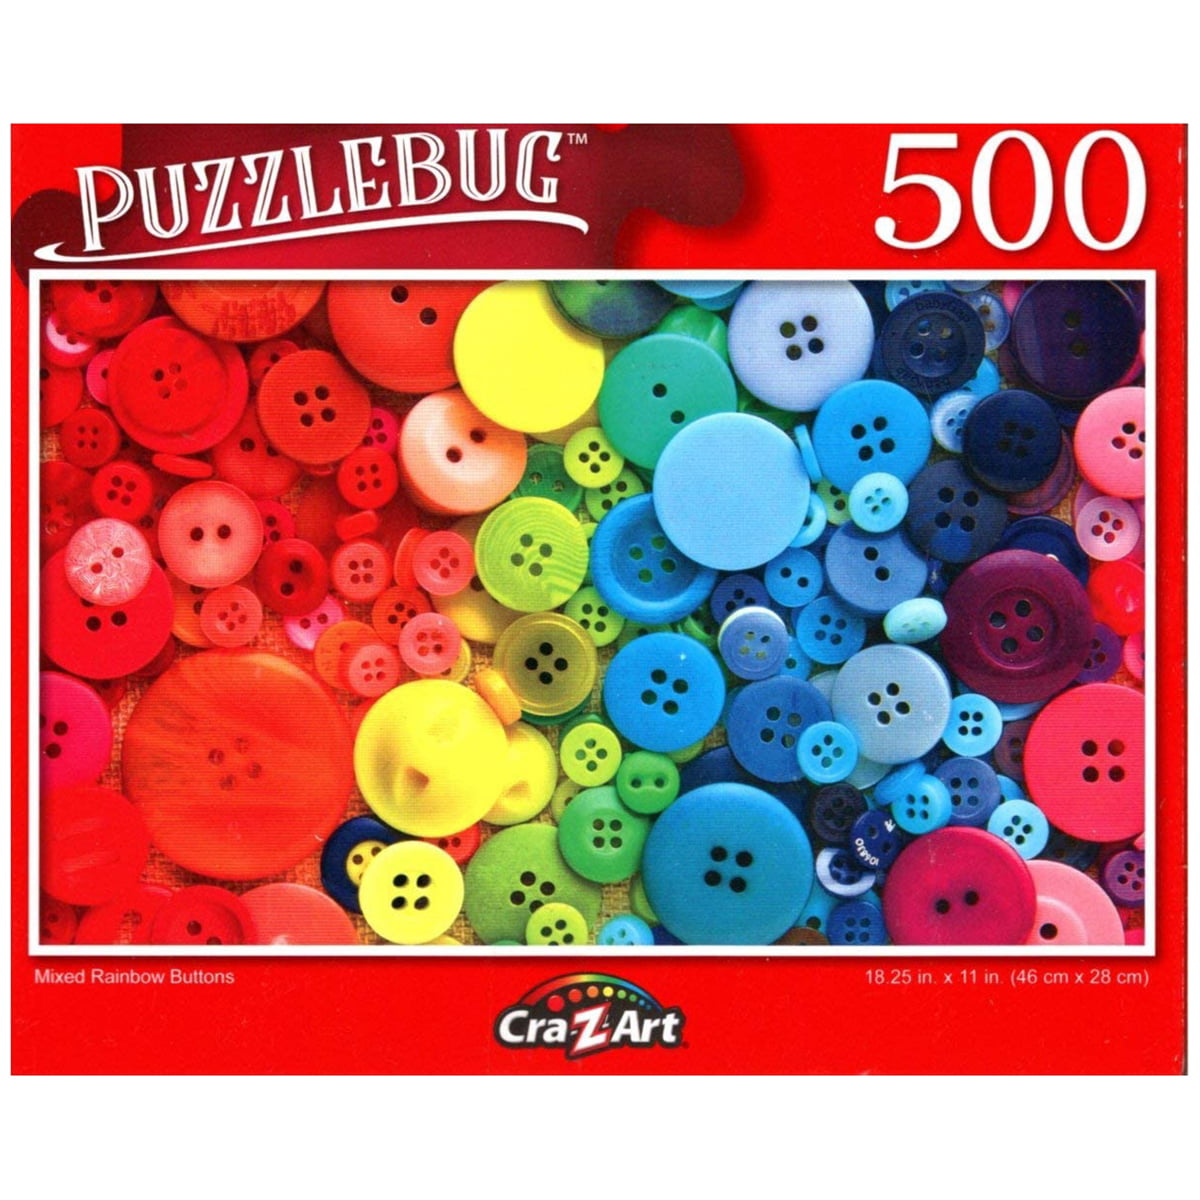 NEW Puzzlebug 500 Piece Jigsaw Puzzle ~ Colorful Birdhouses for Sale 